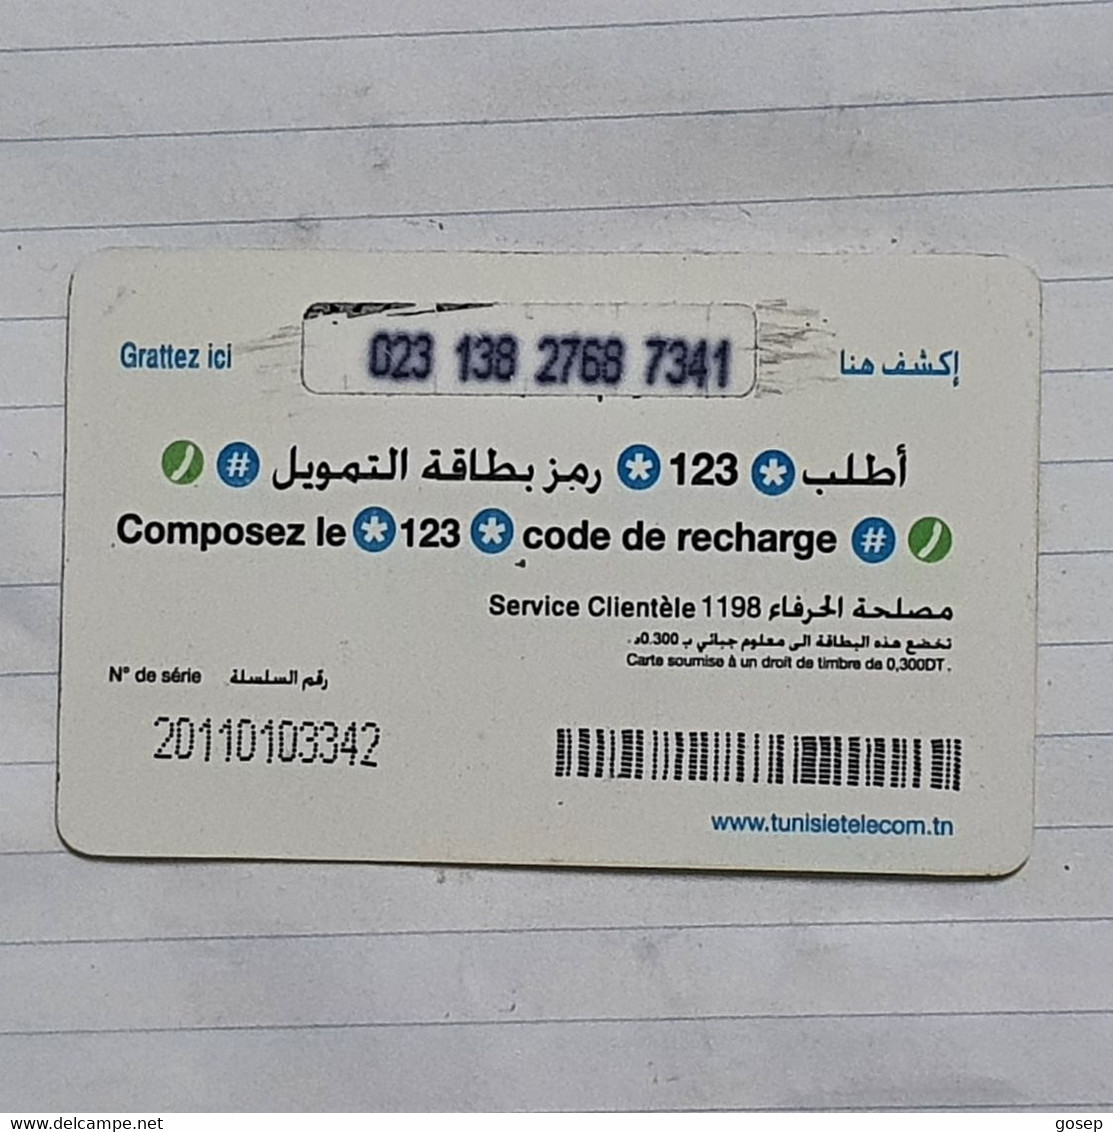 TUNISIA-(TN-TTL-REF-0032A)-GIRL1-(97)-(023-138-2768-7341)-(11/98)-(look From Out Side Card-BARCODE)-used Card - Tunesien